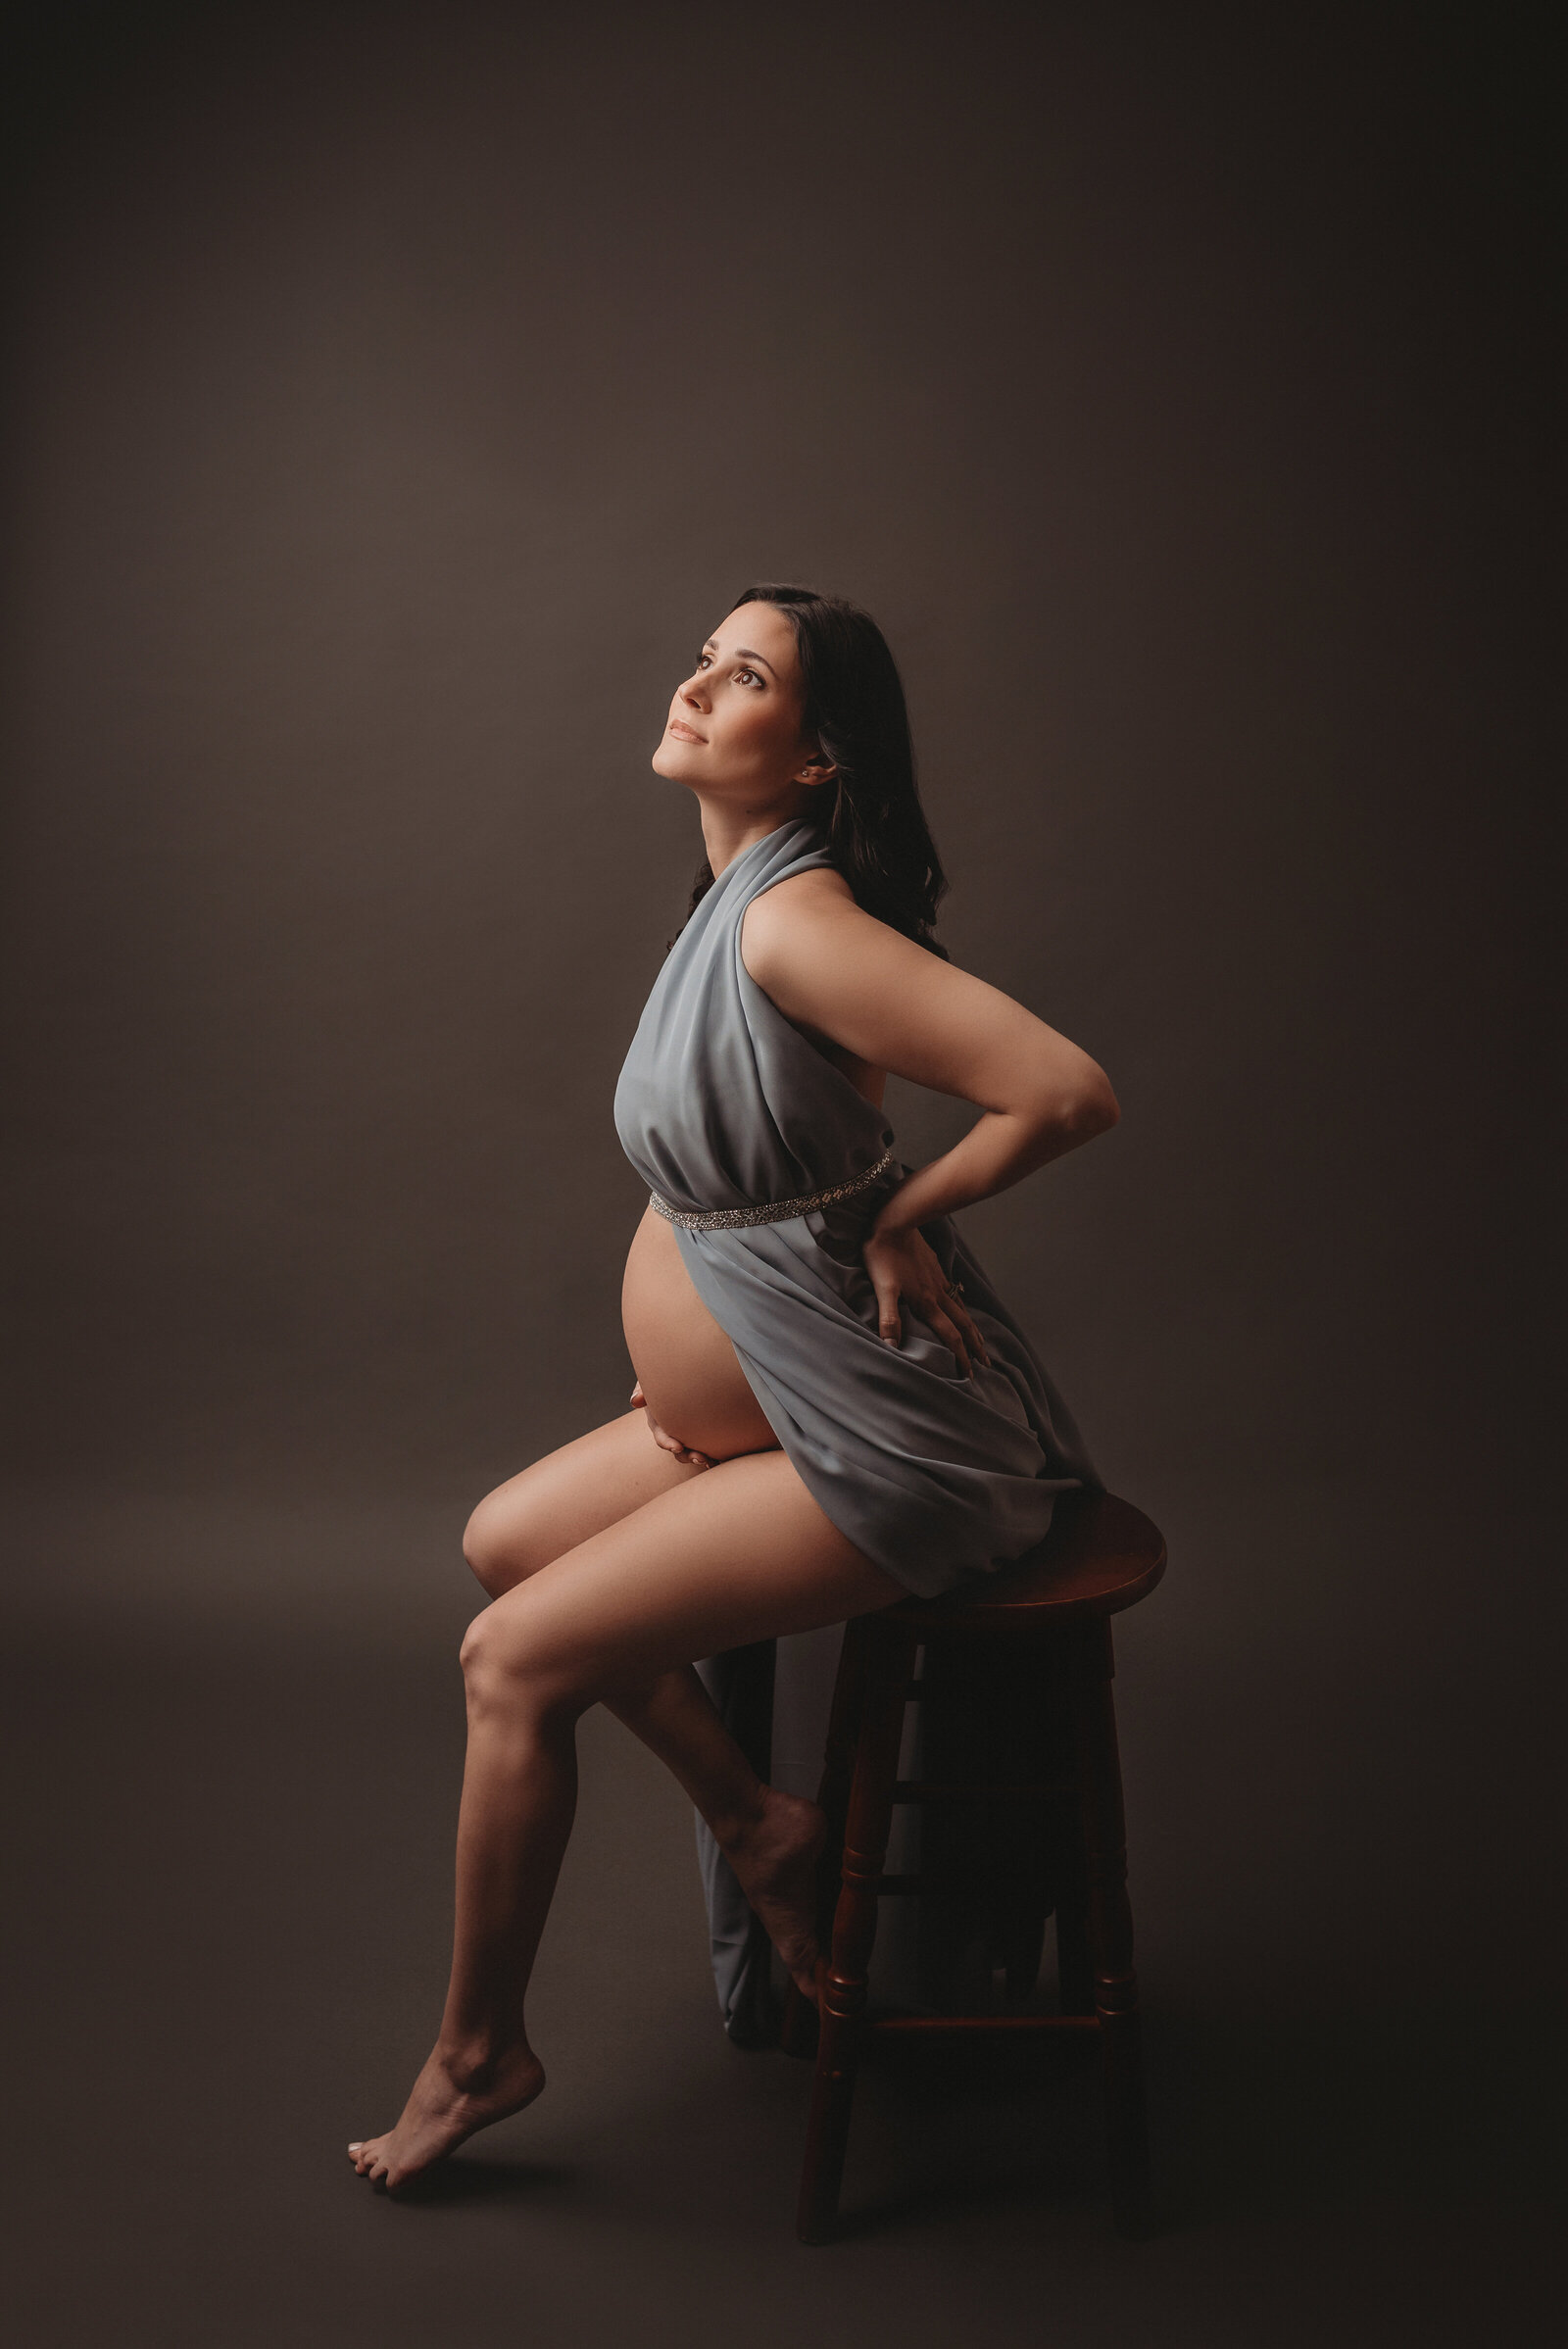 35 week pregnant mother to be at Marietta GA maternity studio sitting on wooden stool dressed in blue chiffon holding baby bump and leaning up towards and looking at light on dark gray backdrop